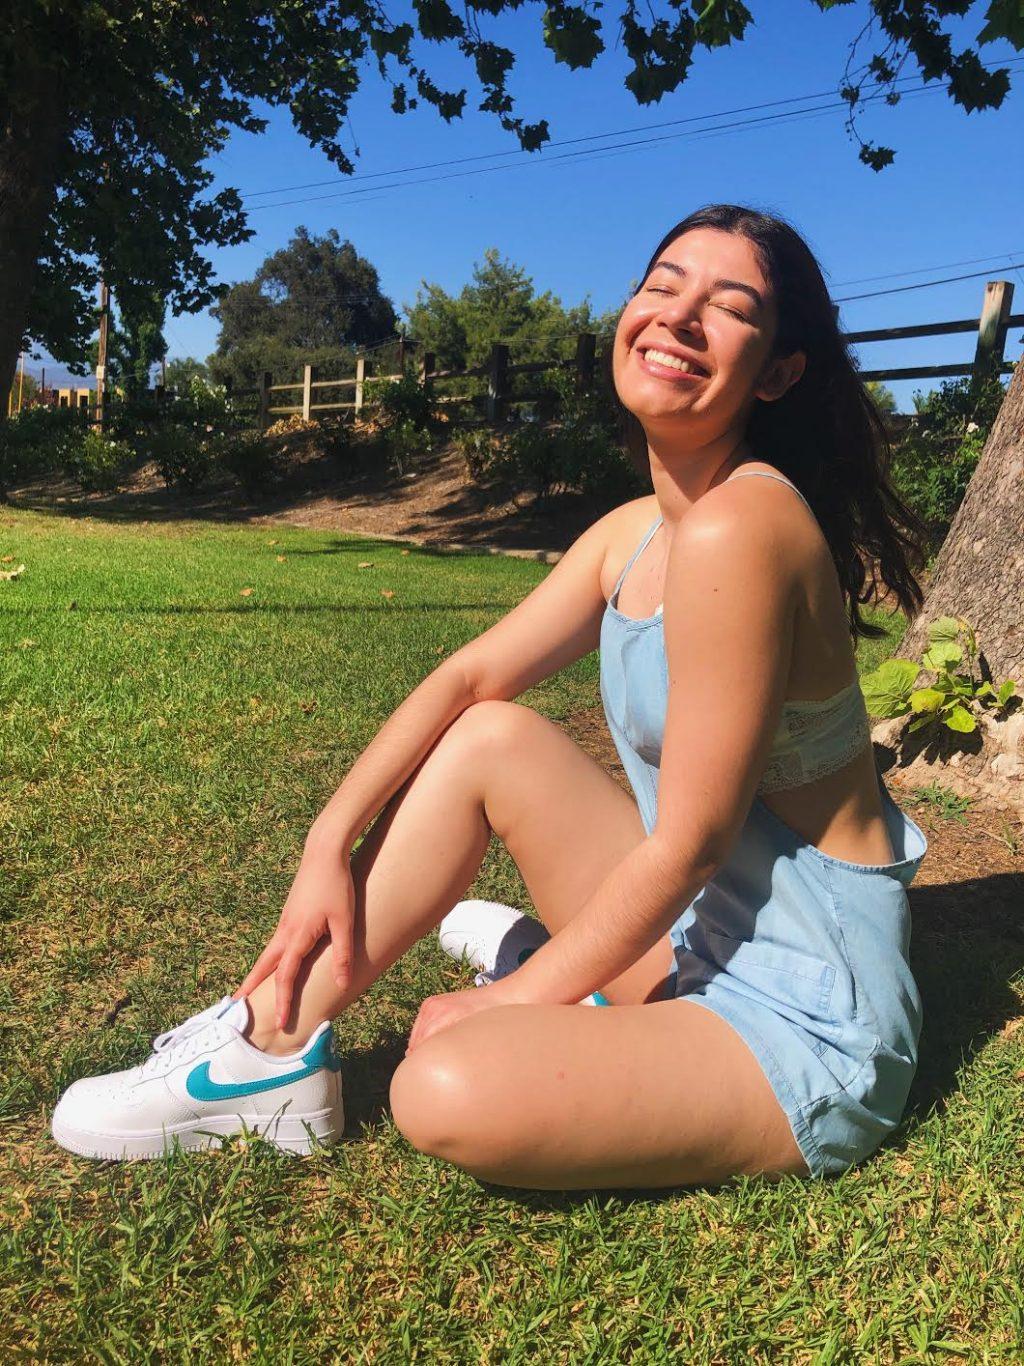 Model Dyani Heredia-Urias poses outside her home in her new Aerie apparel. She announced her partnership with the clothing brand via an Instagram post in July. Photo courtesy of Dyani Heredia-Urias